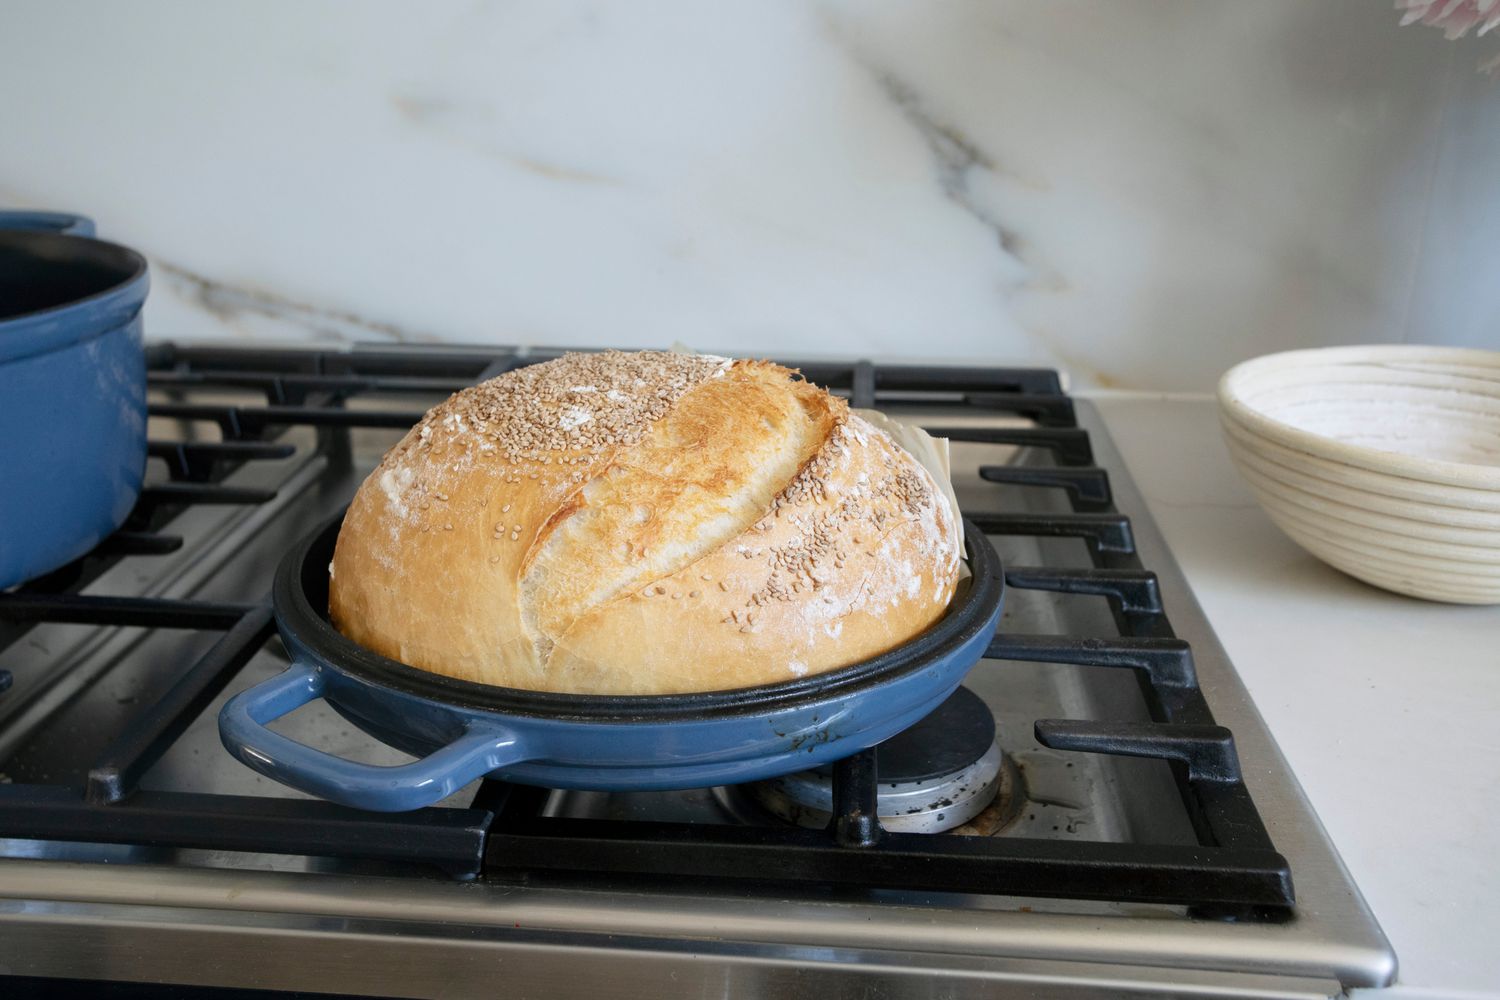 Blue Our Place Cast Iron Hot Grill sitting on stovetop with bread loaf inside of it